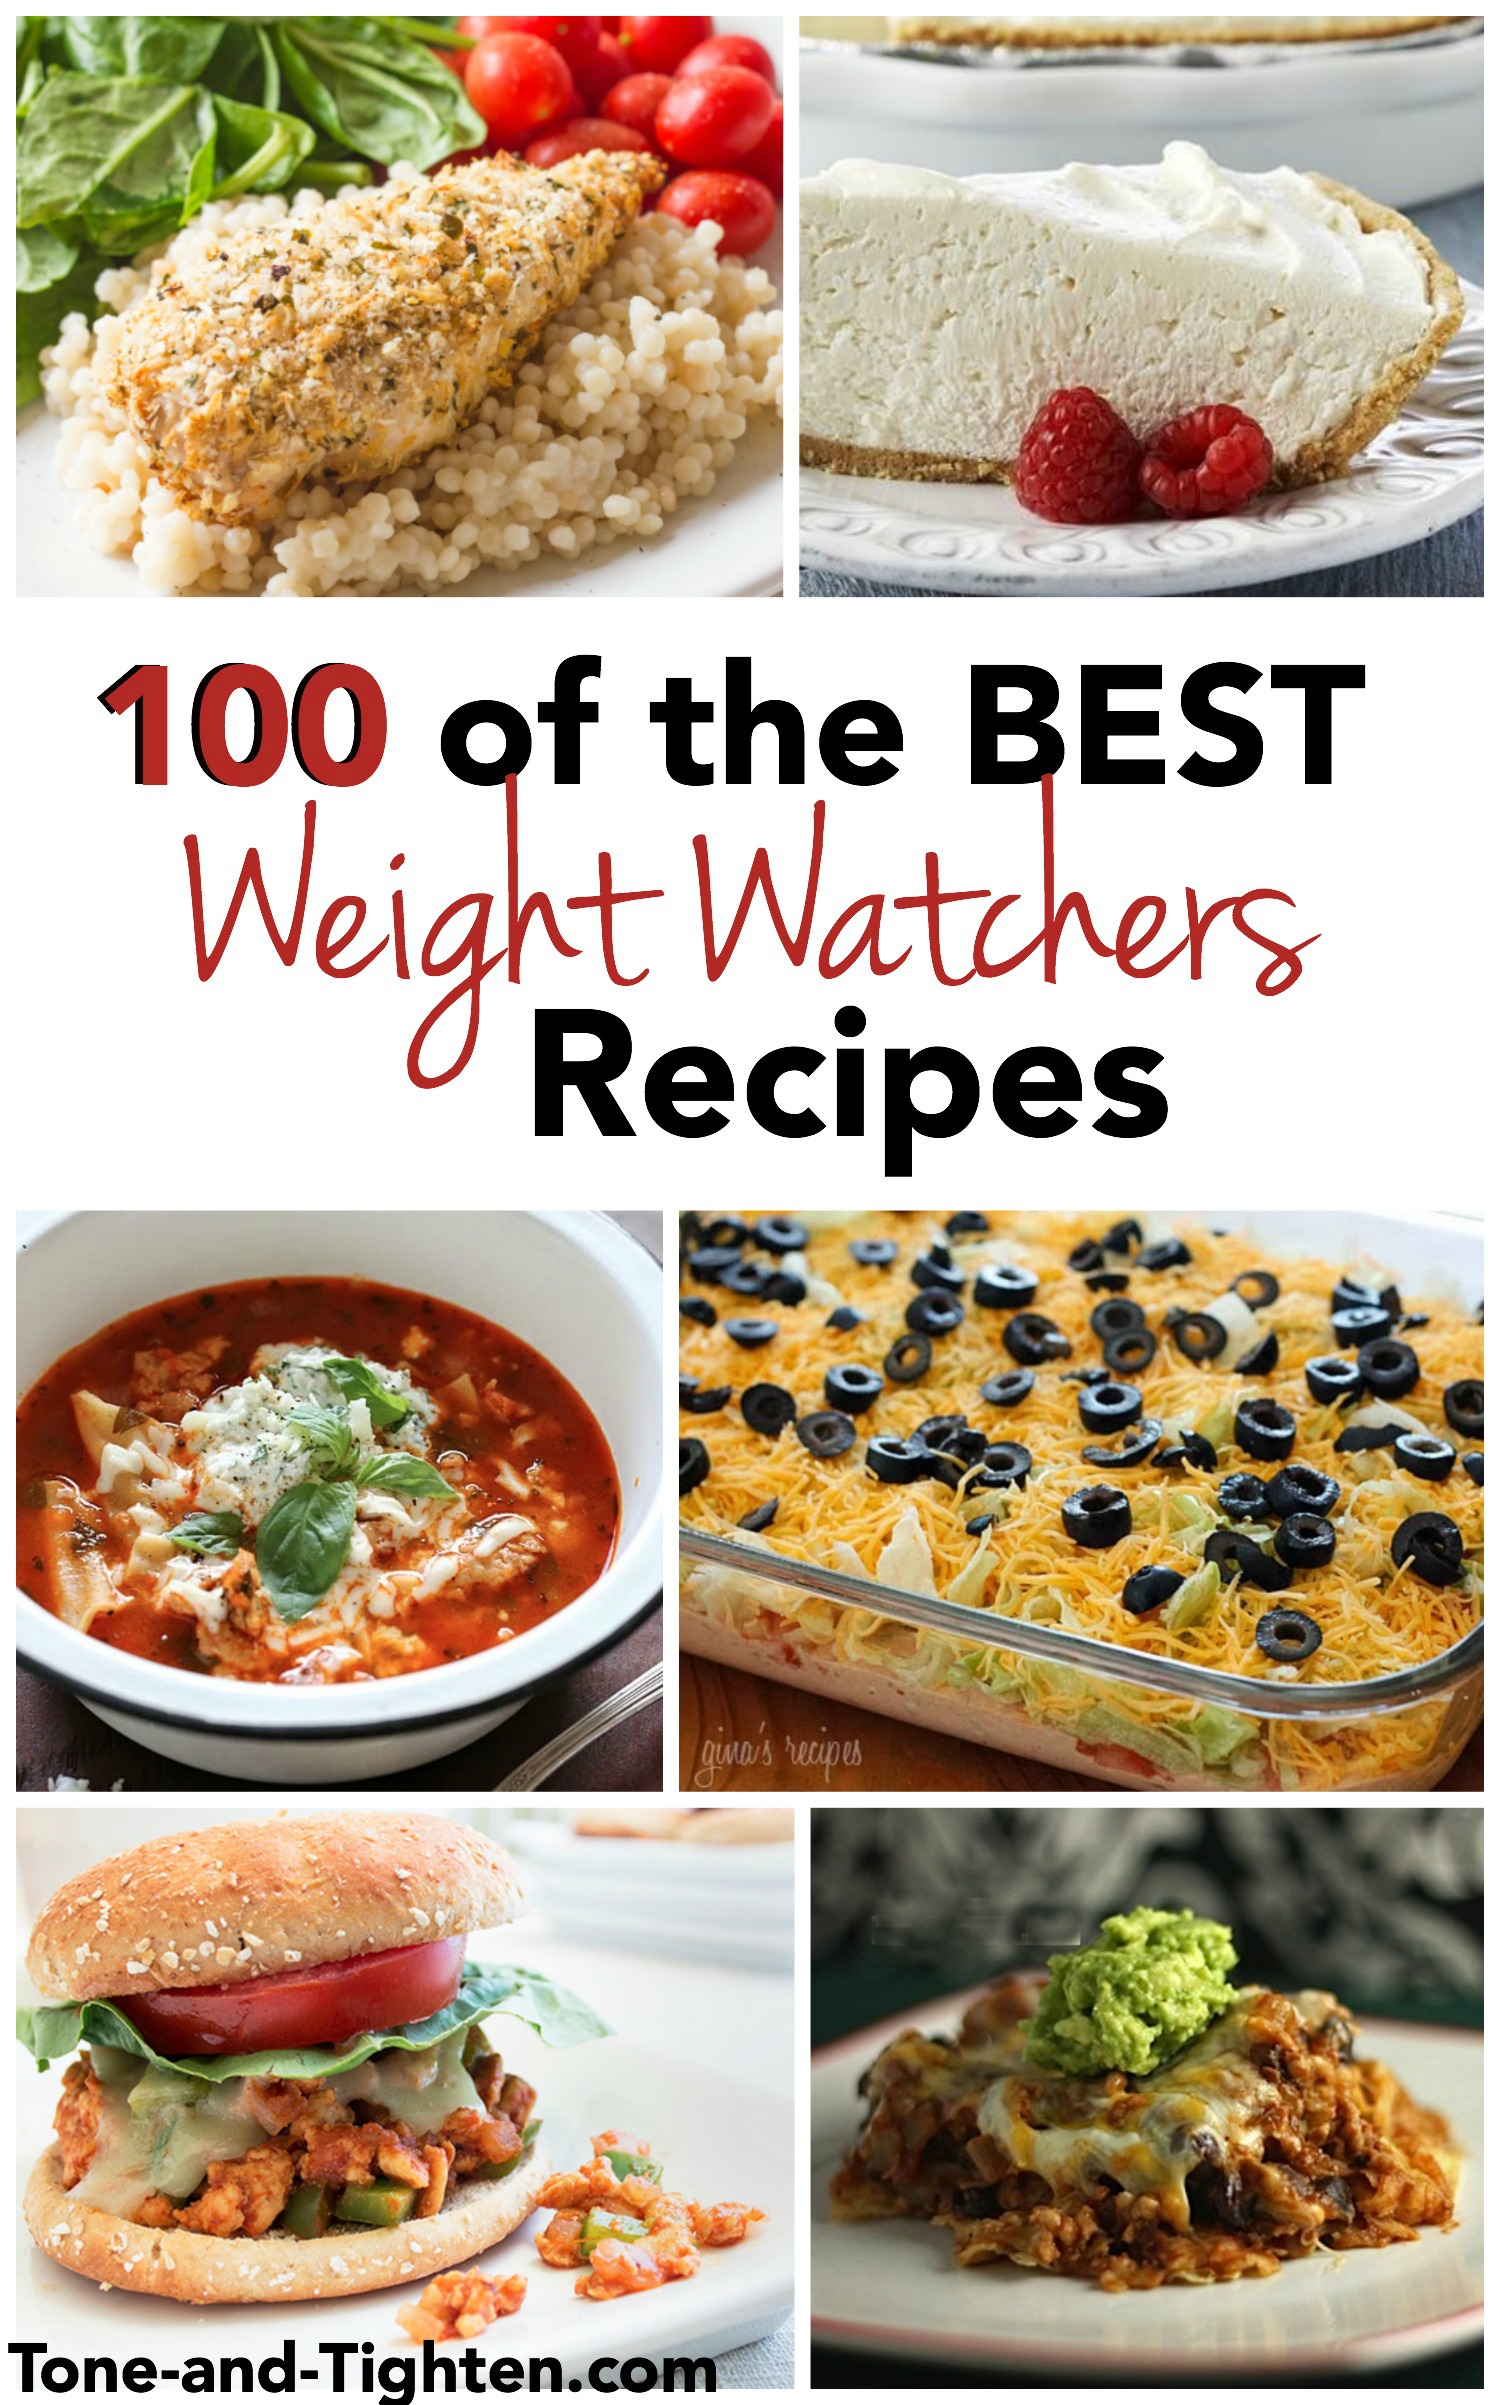 100 of the Best Weight Watchers Recipes